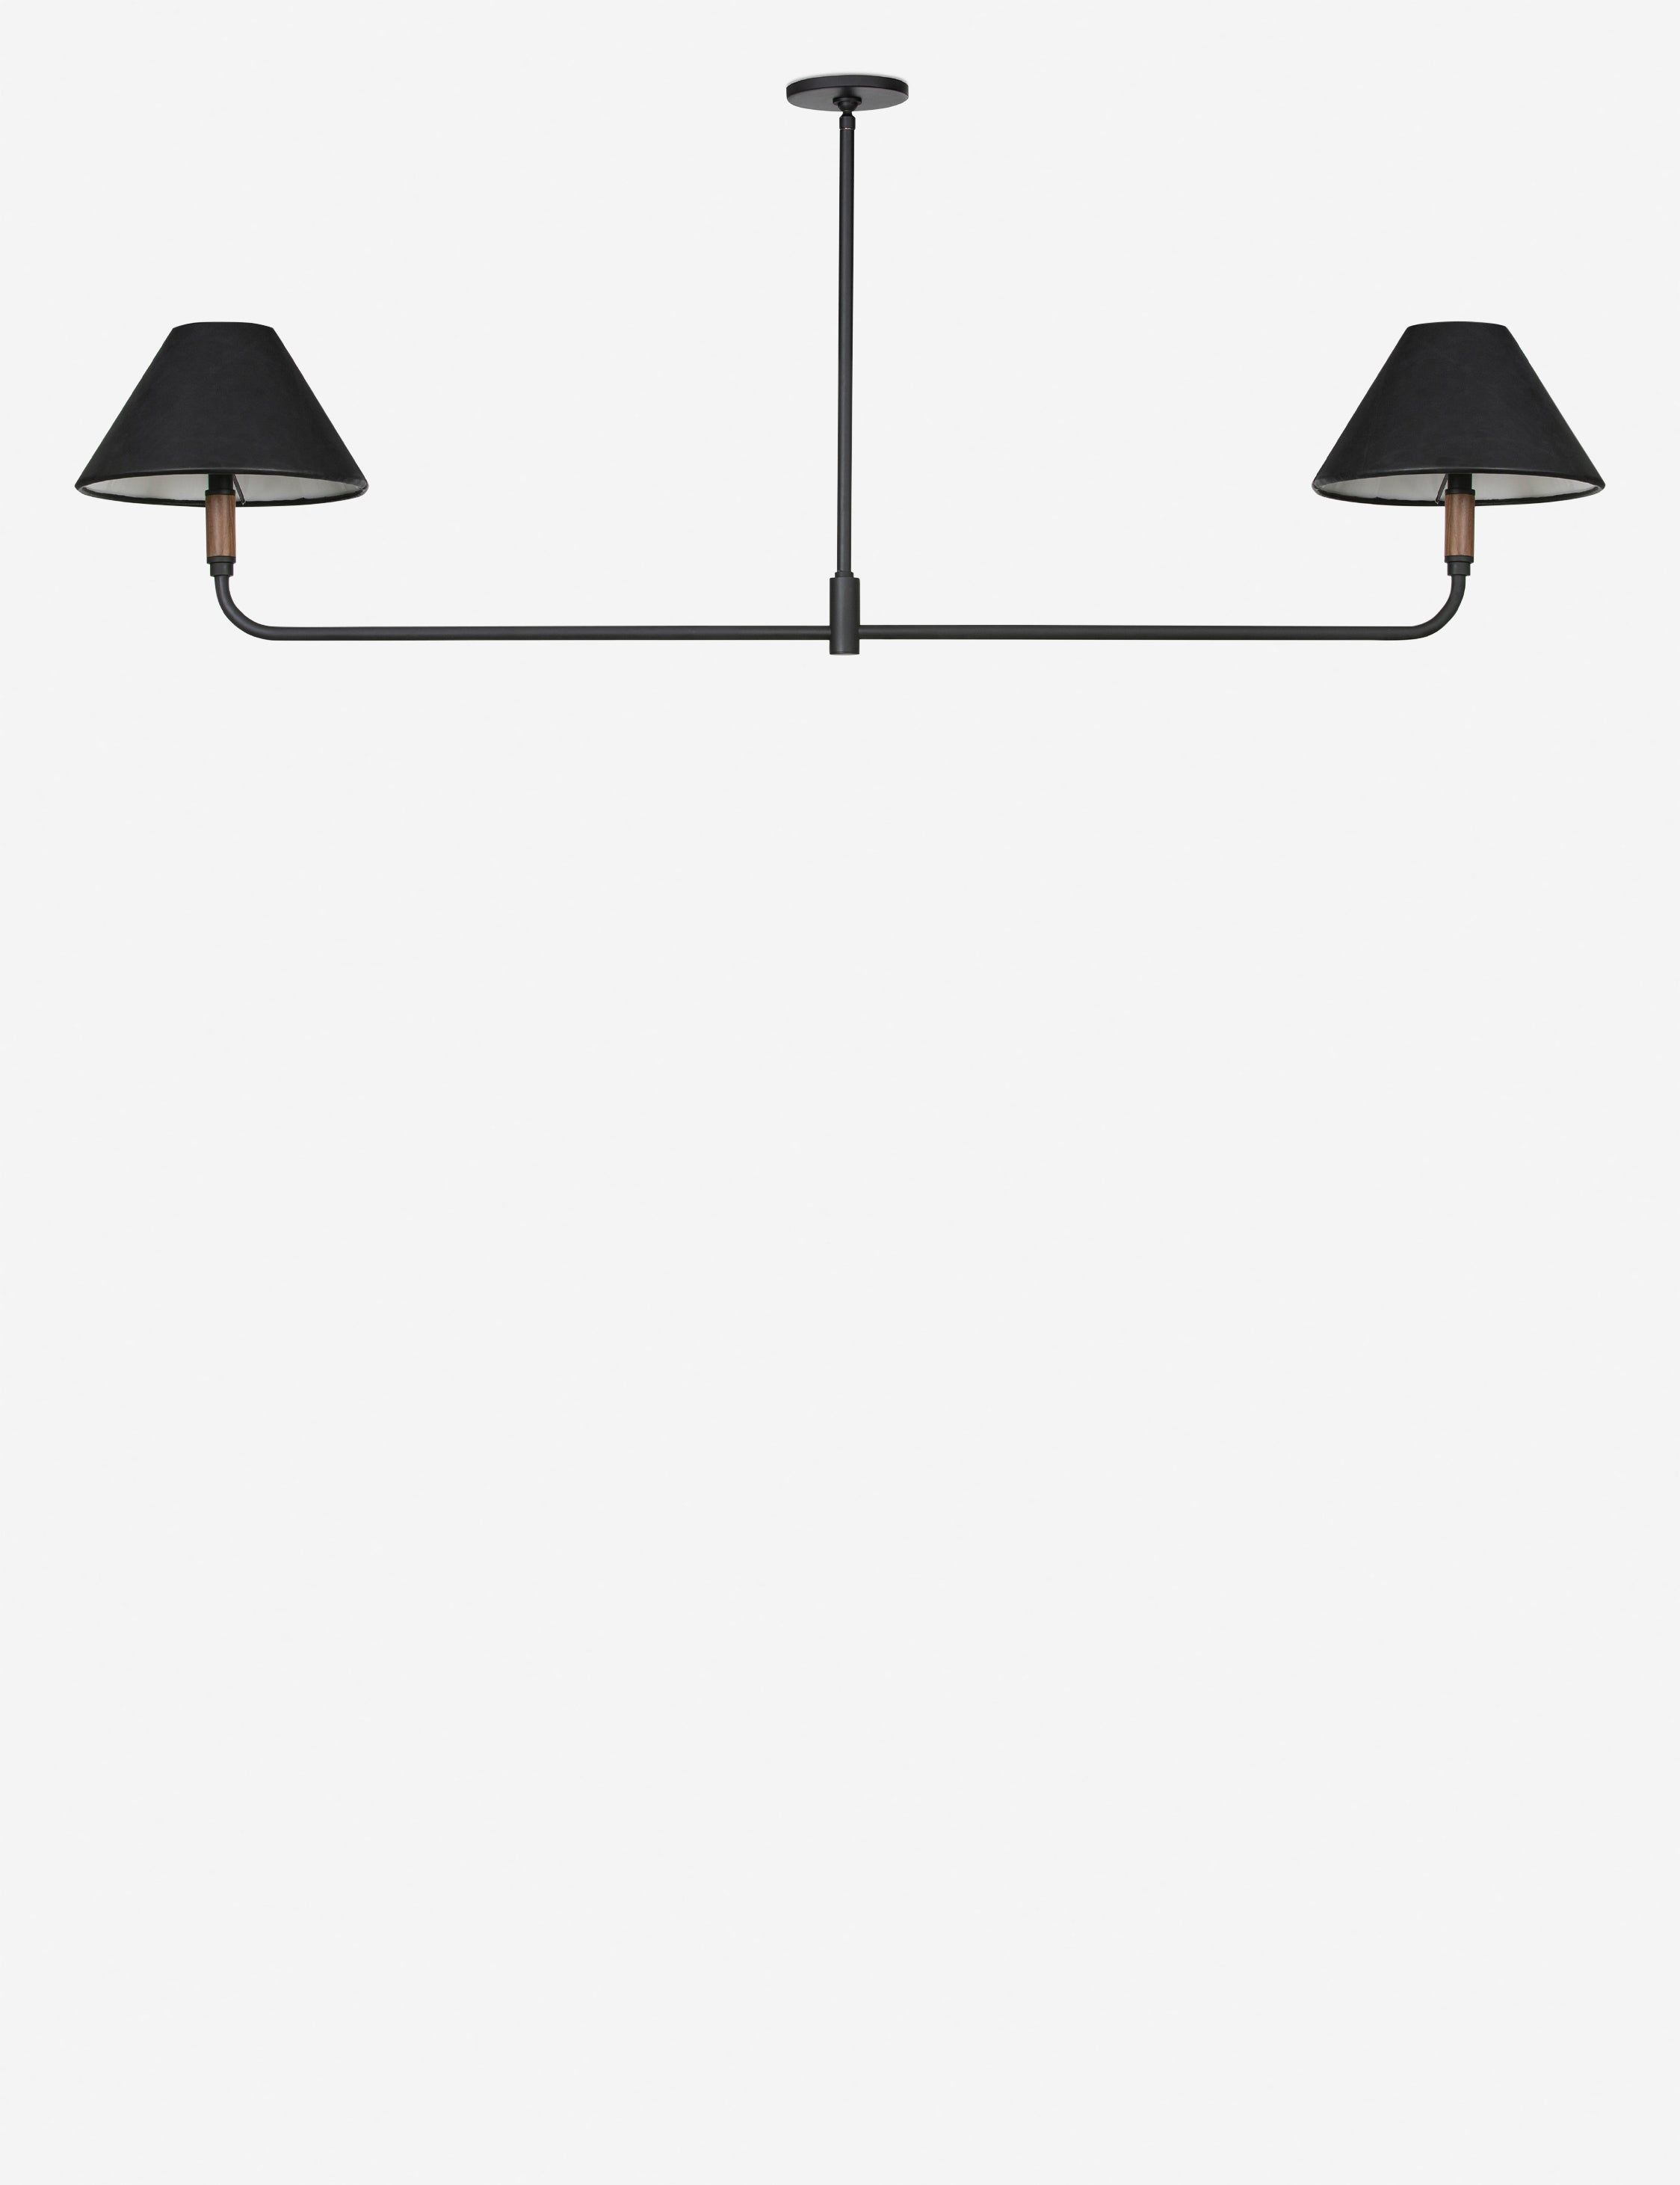 Doherty Chic Simplicity Black LED Double Island Pendant